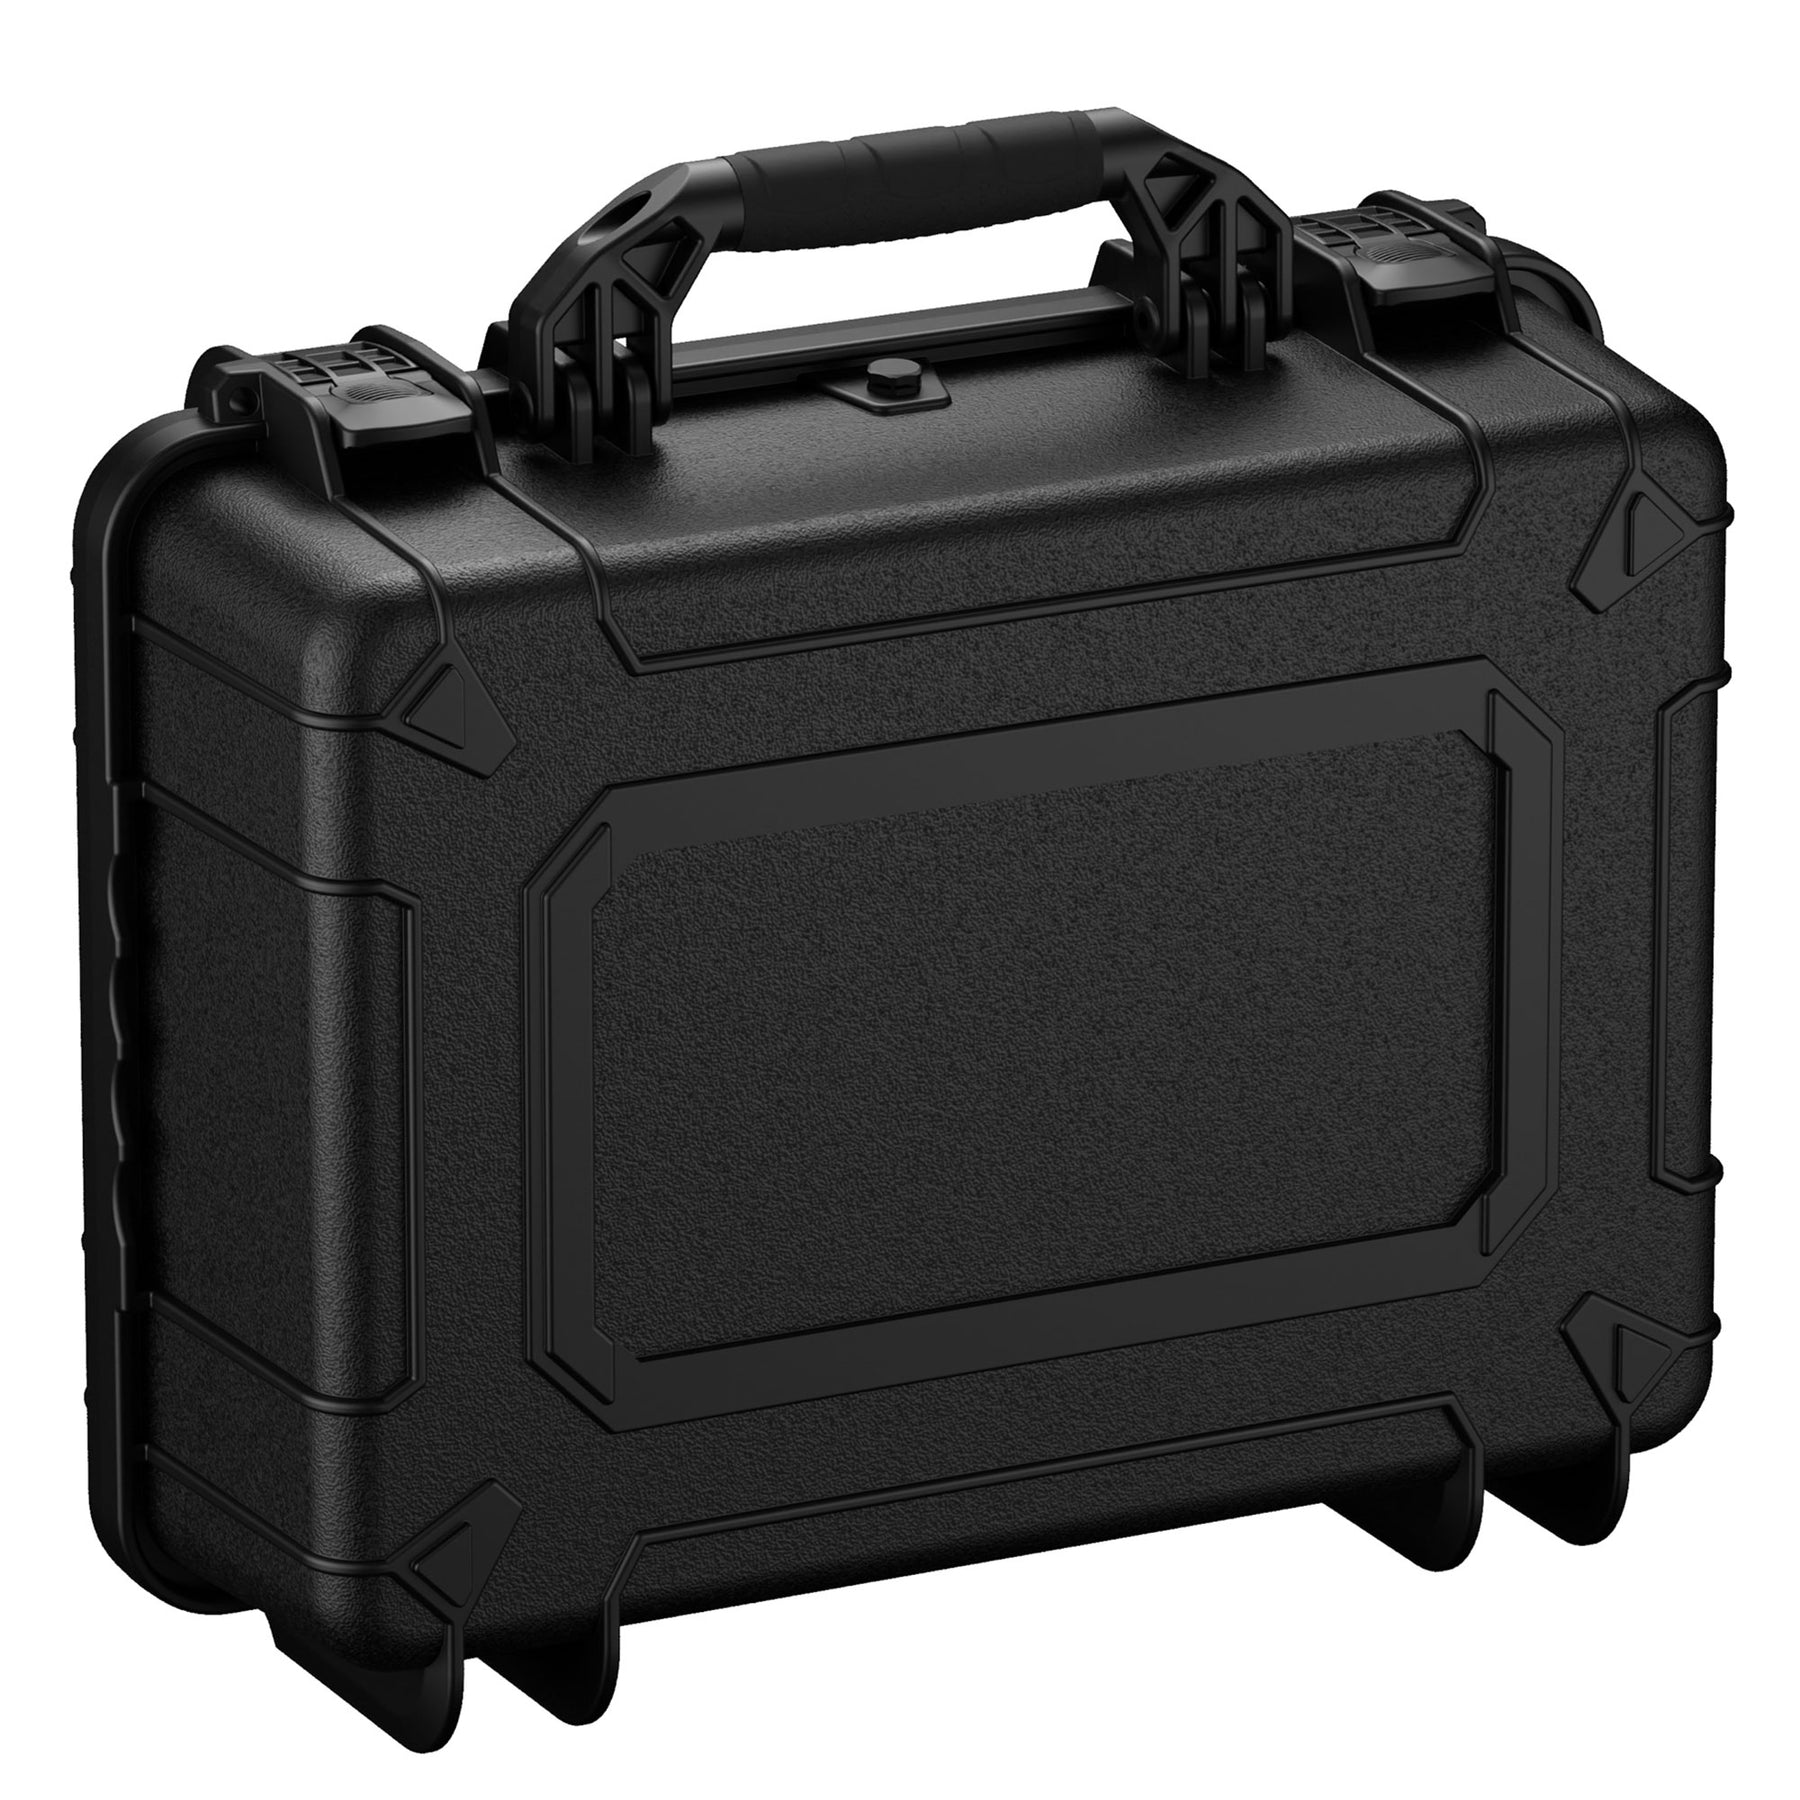 Newest Hard Protect Box Storage Bag Waterproof Shockproof Carrying